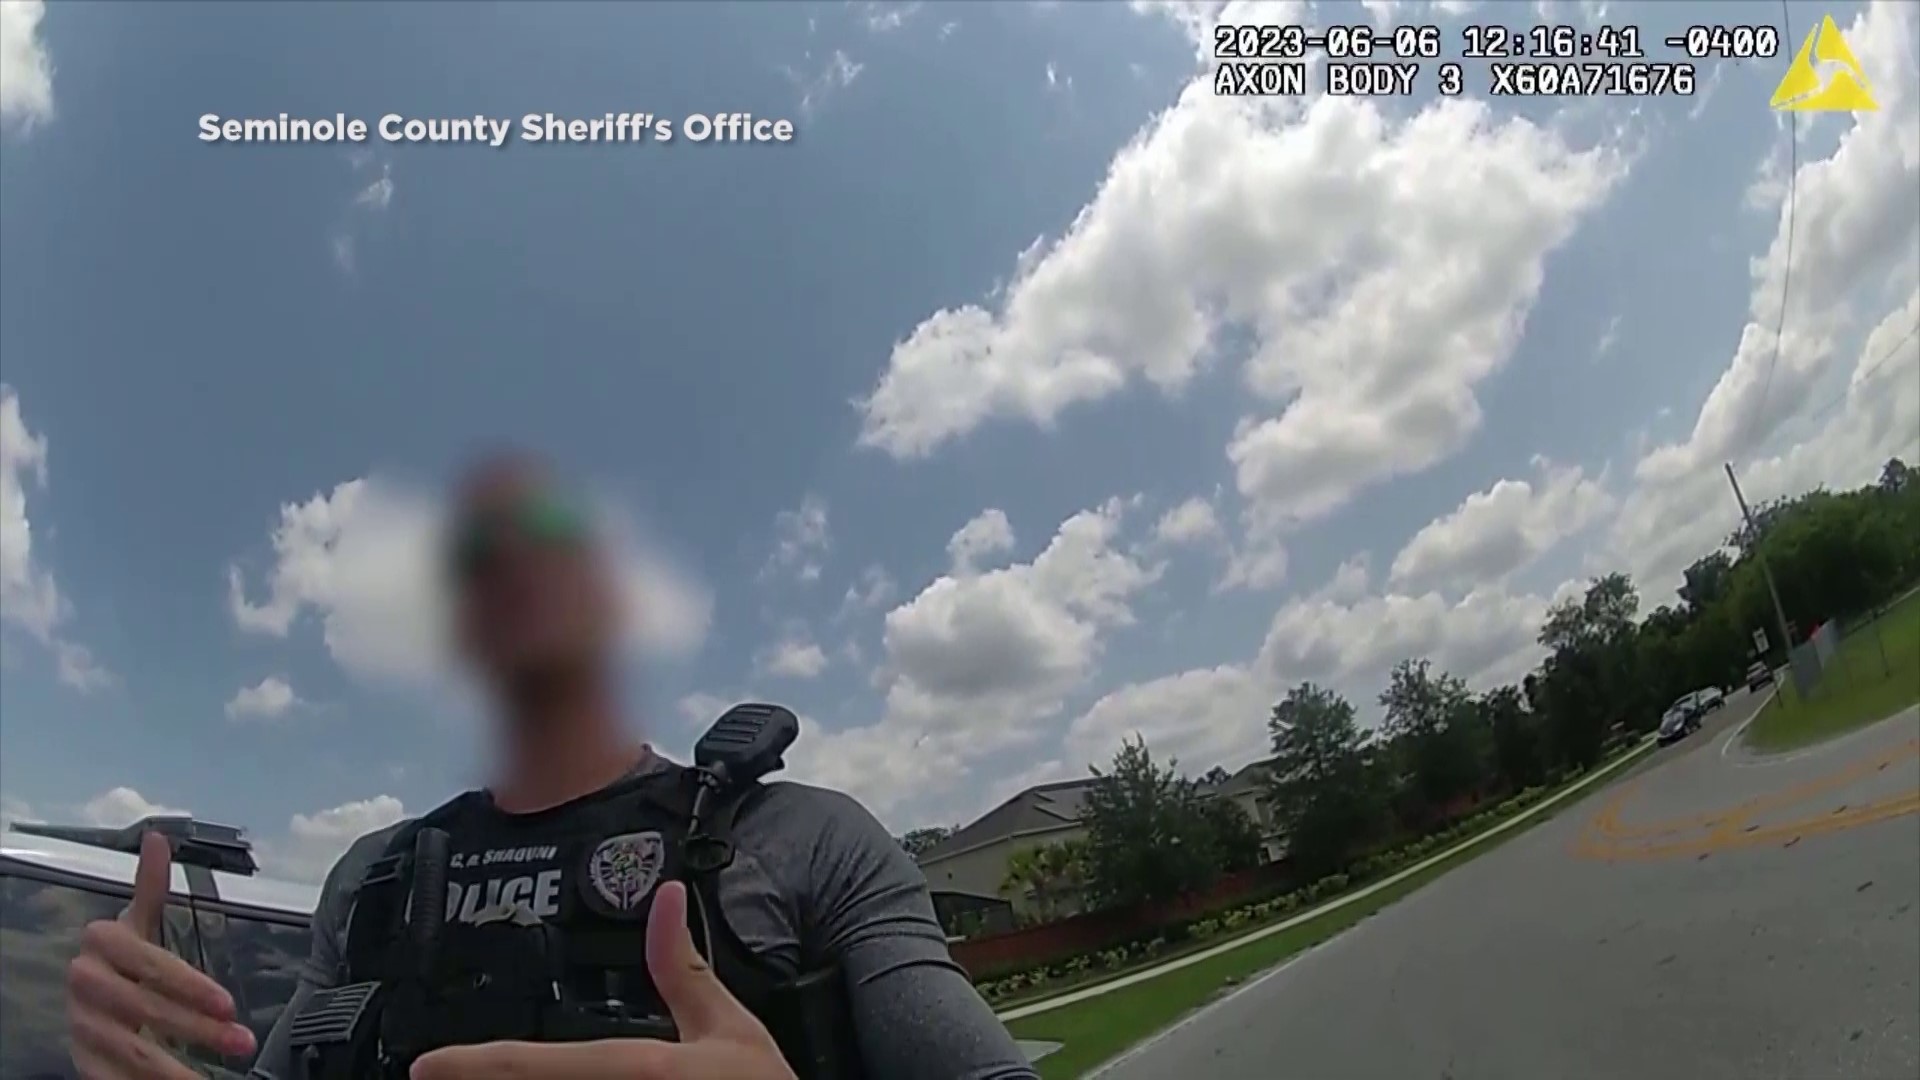 Orlando police officer pulled over by deputy: Watch body cam video